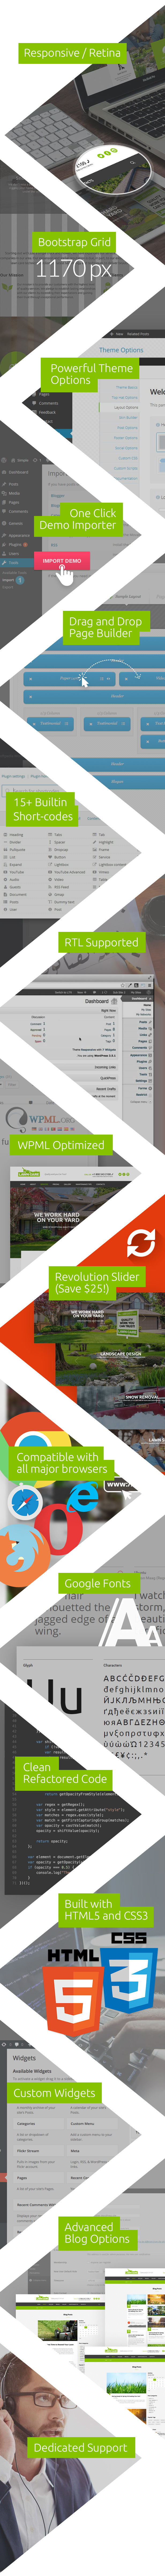 Lawn Care services - HTML template